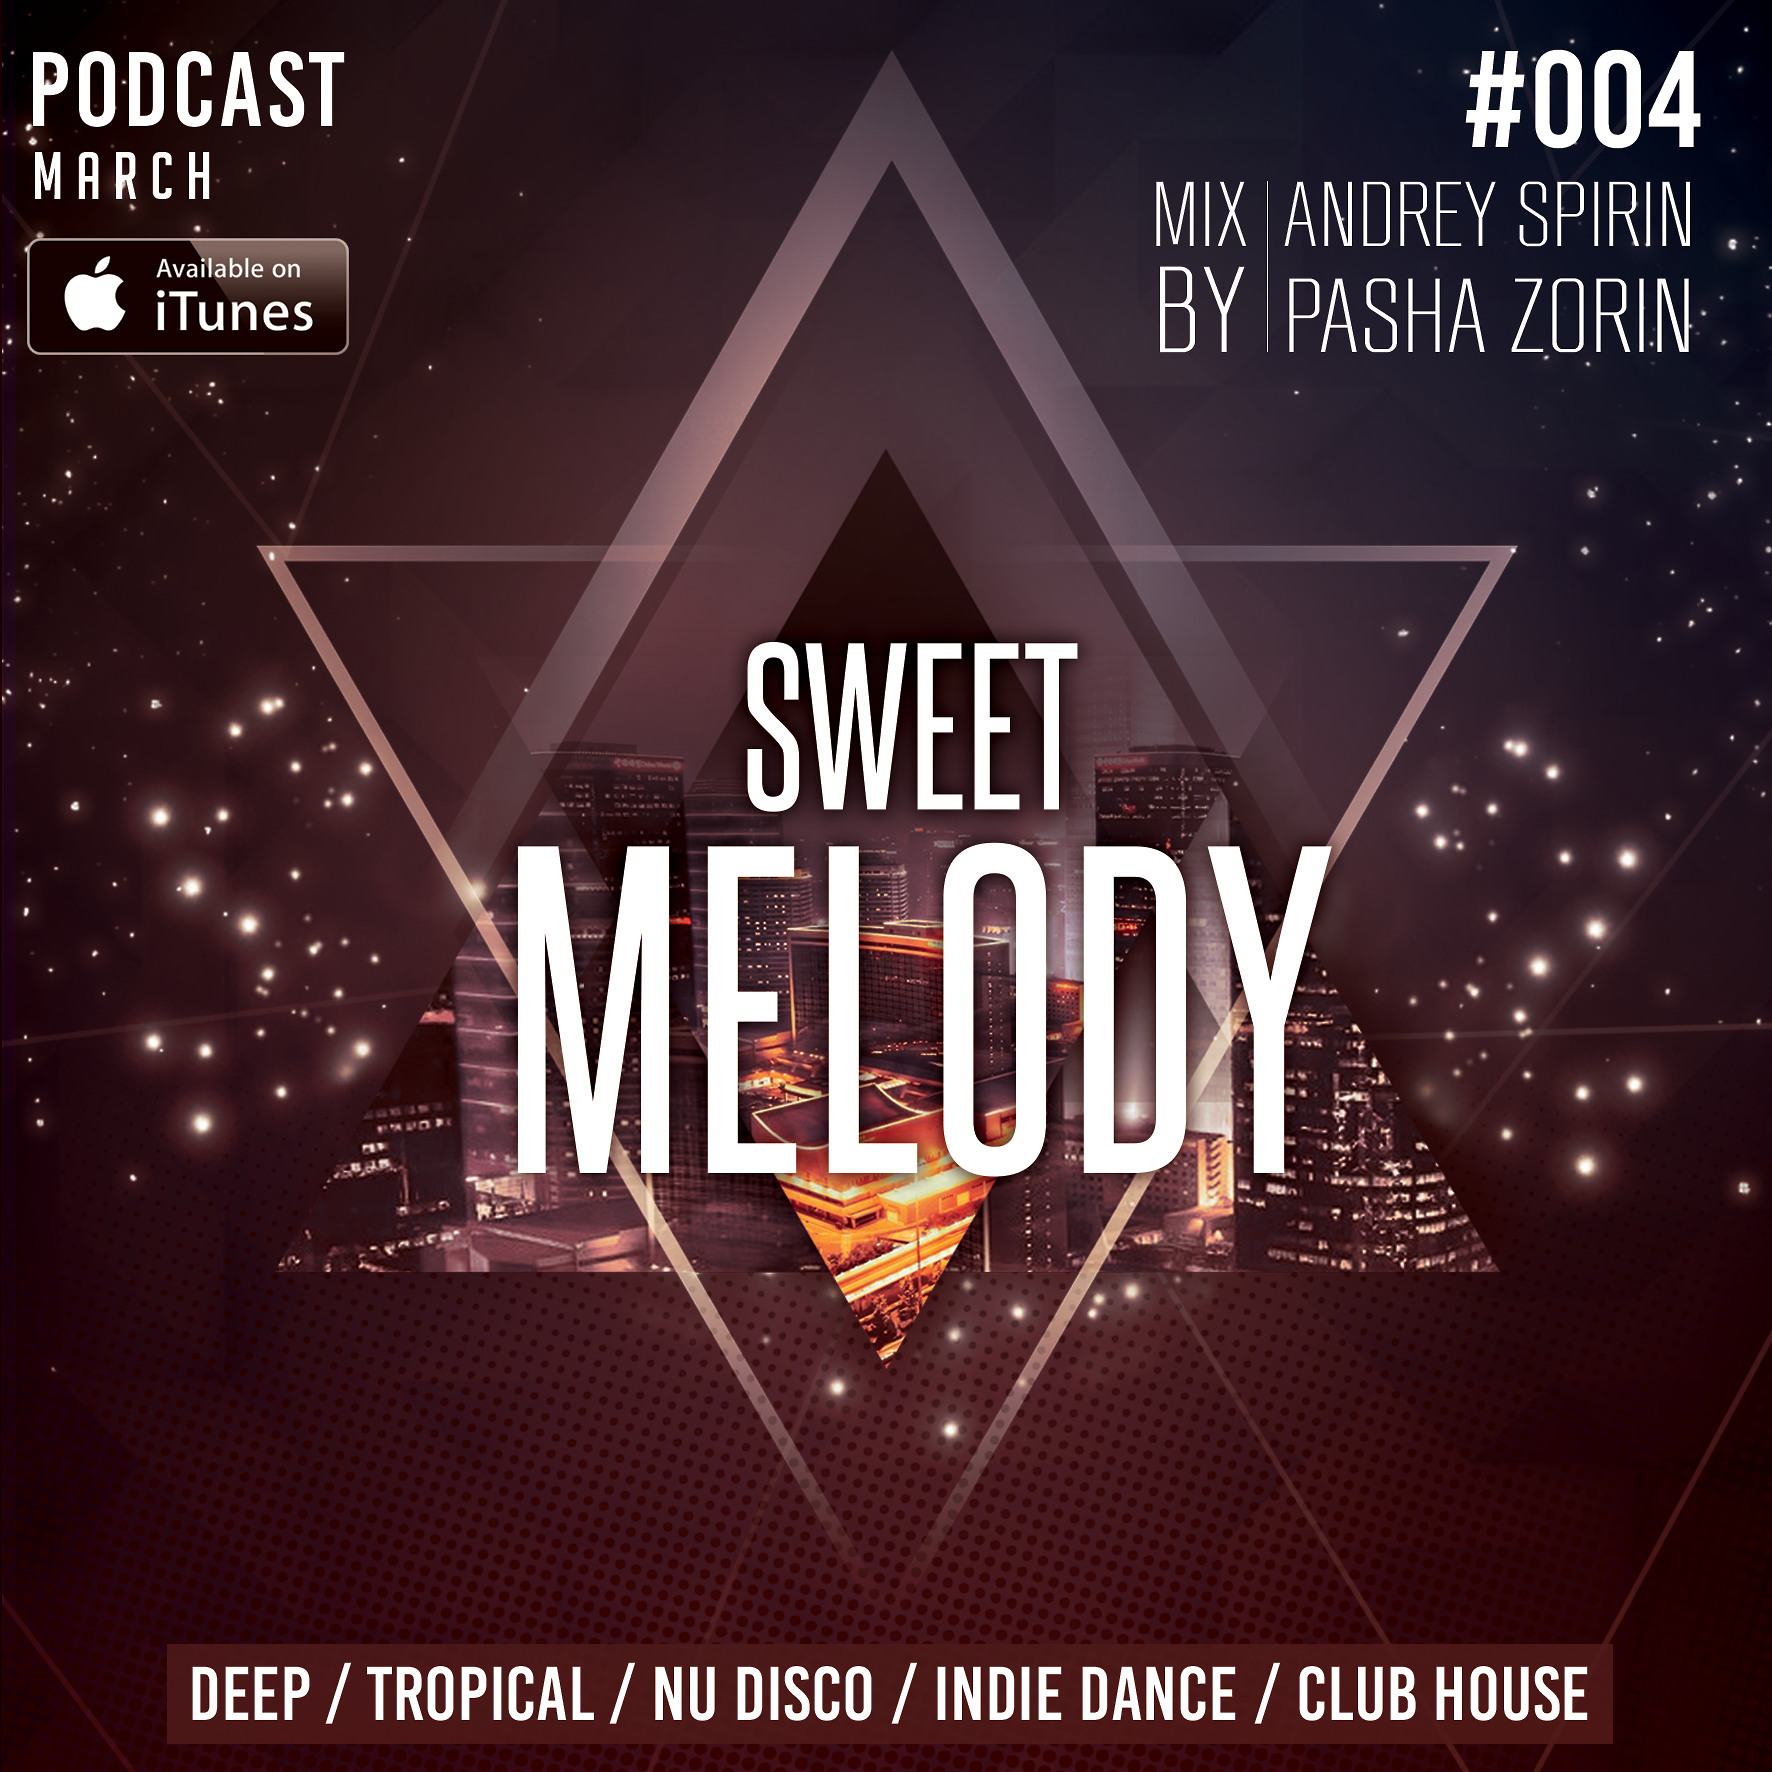 Andrey mix. Indie Dance Electronica. Indie Dance. Dhtm Podcast 011 - Airrica. Indie Dance Music.